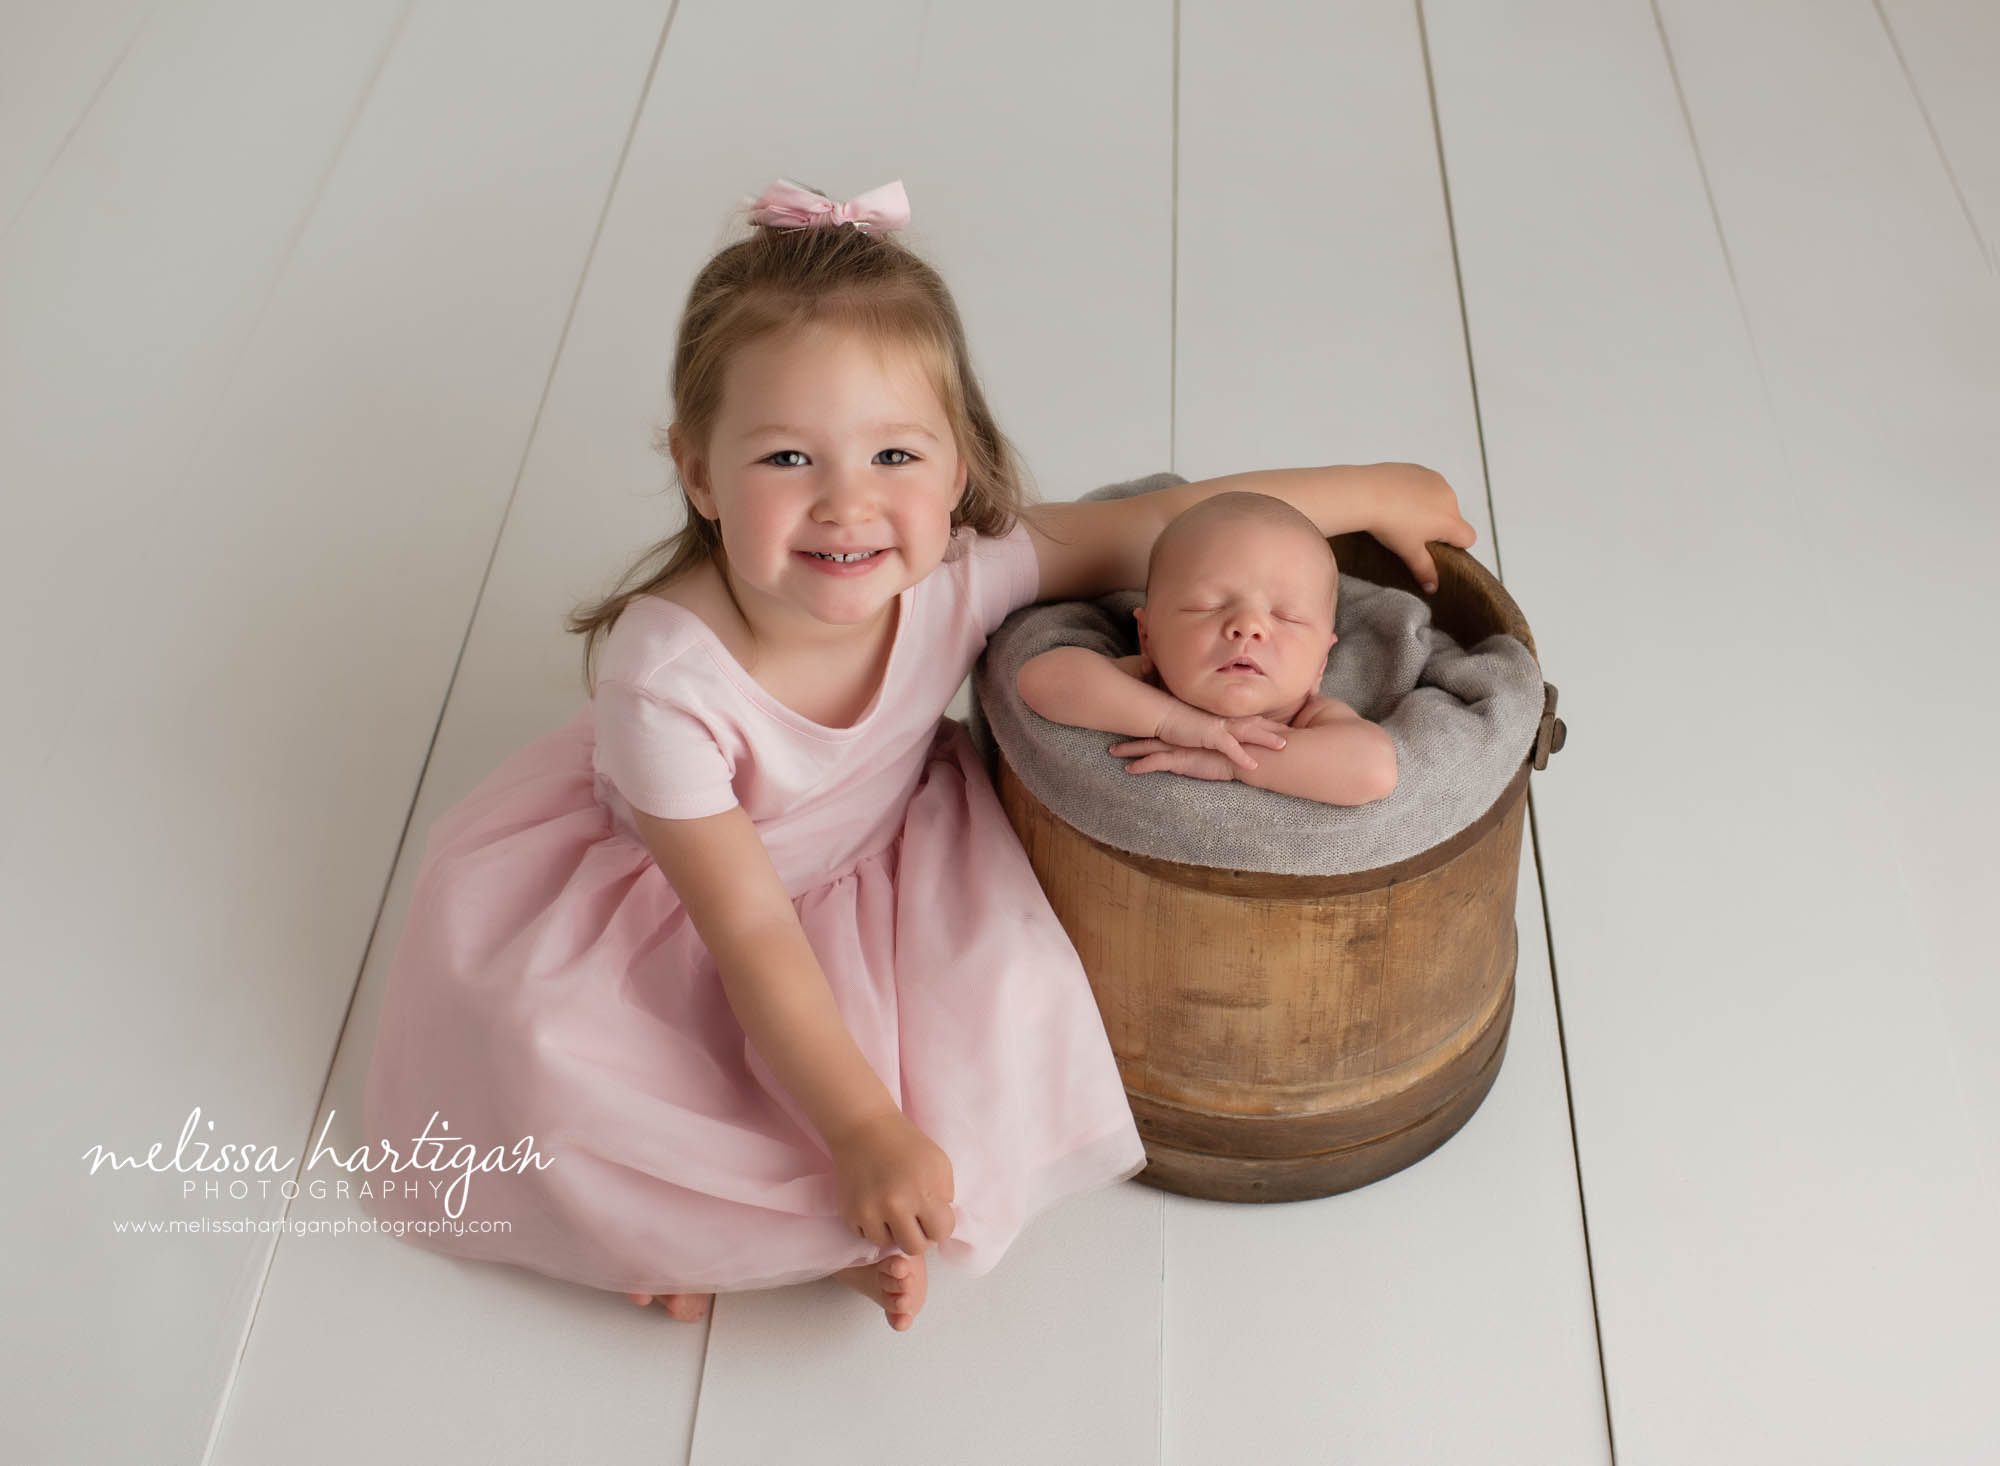 newborn baby boy and older toddler sister in studio newborn family photo picture